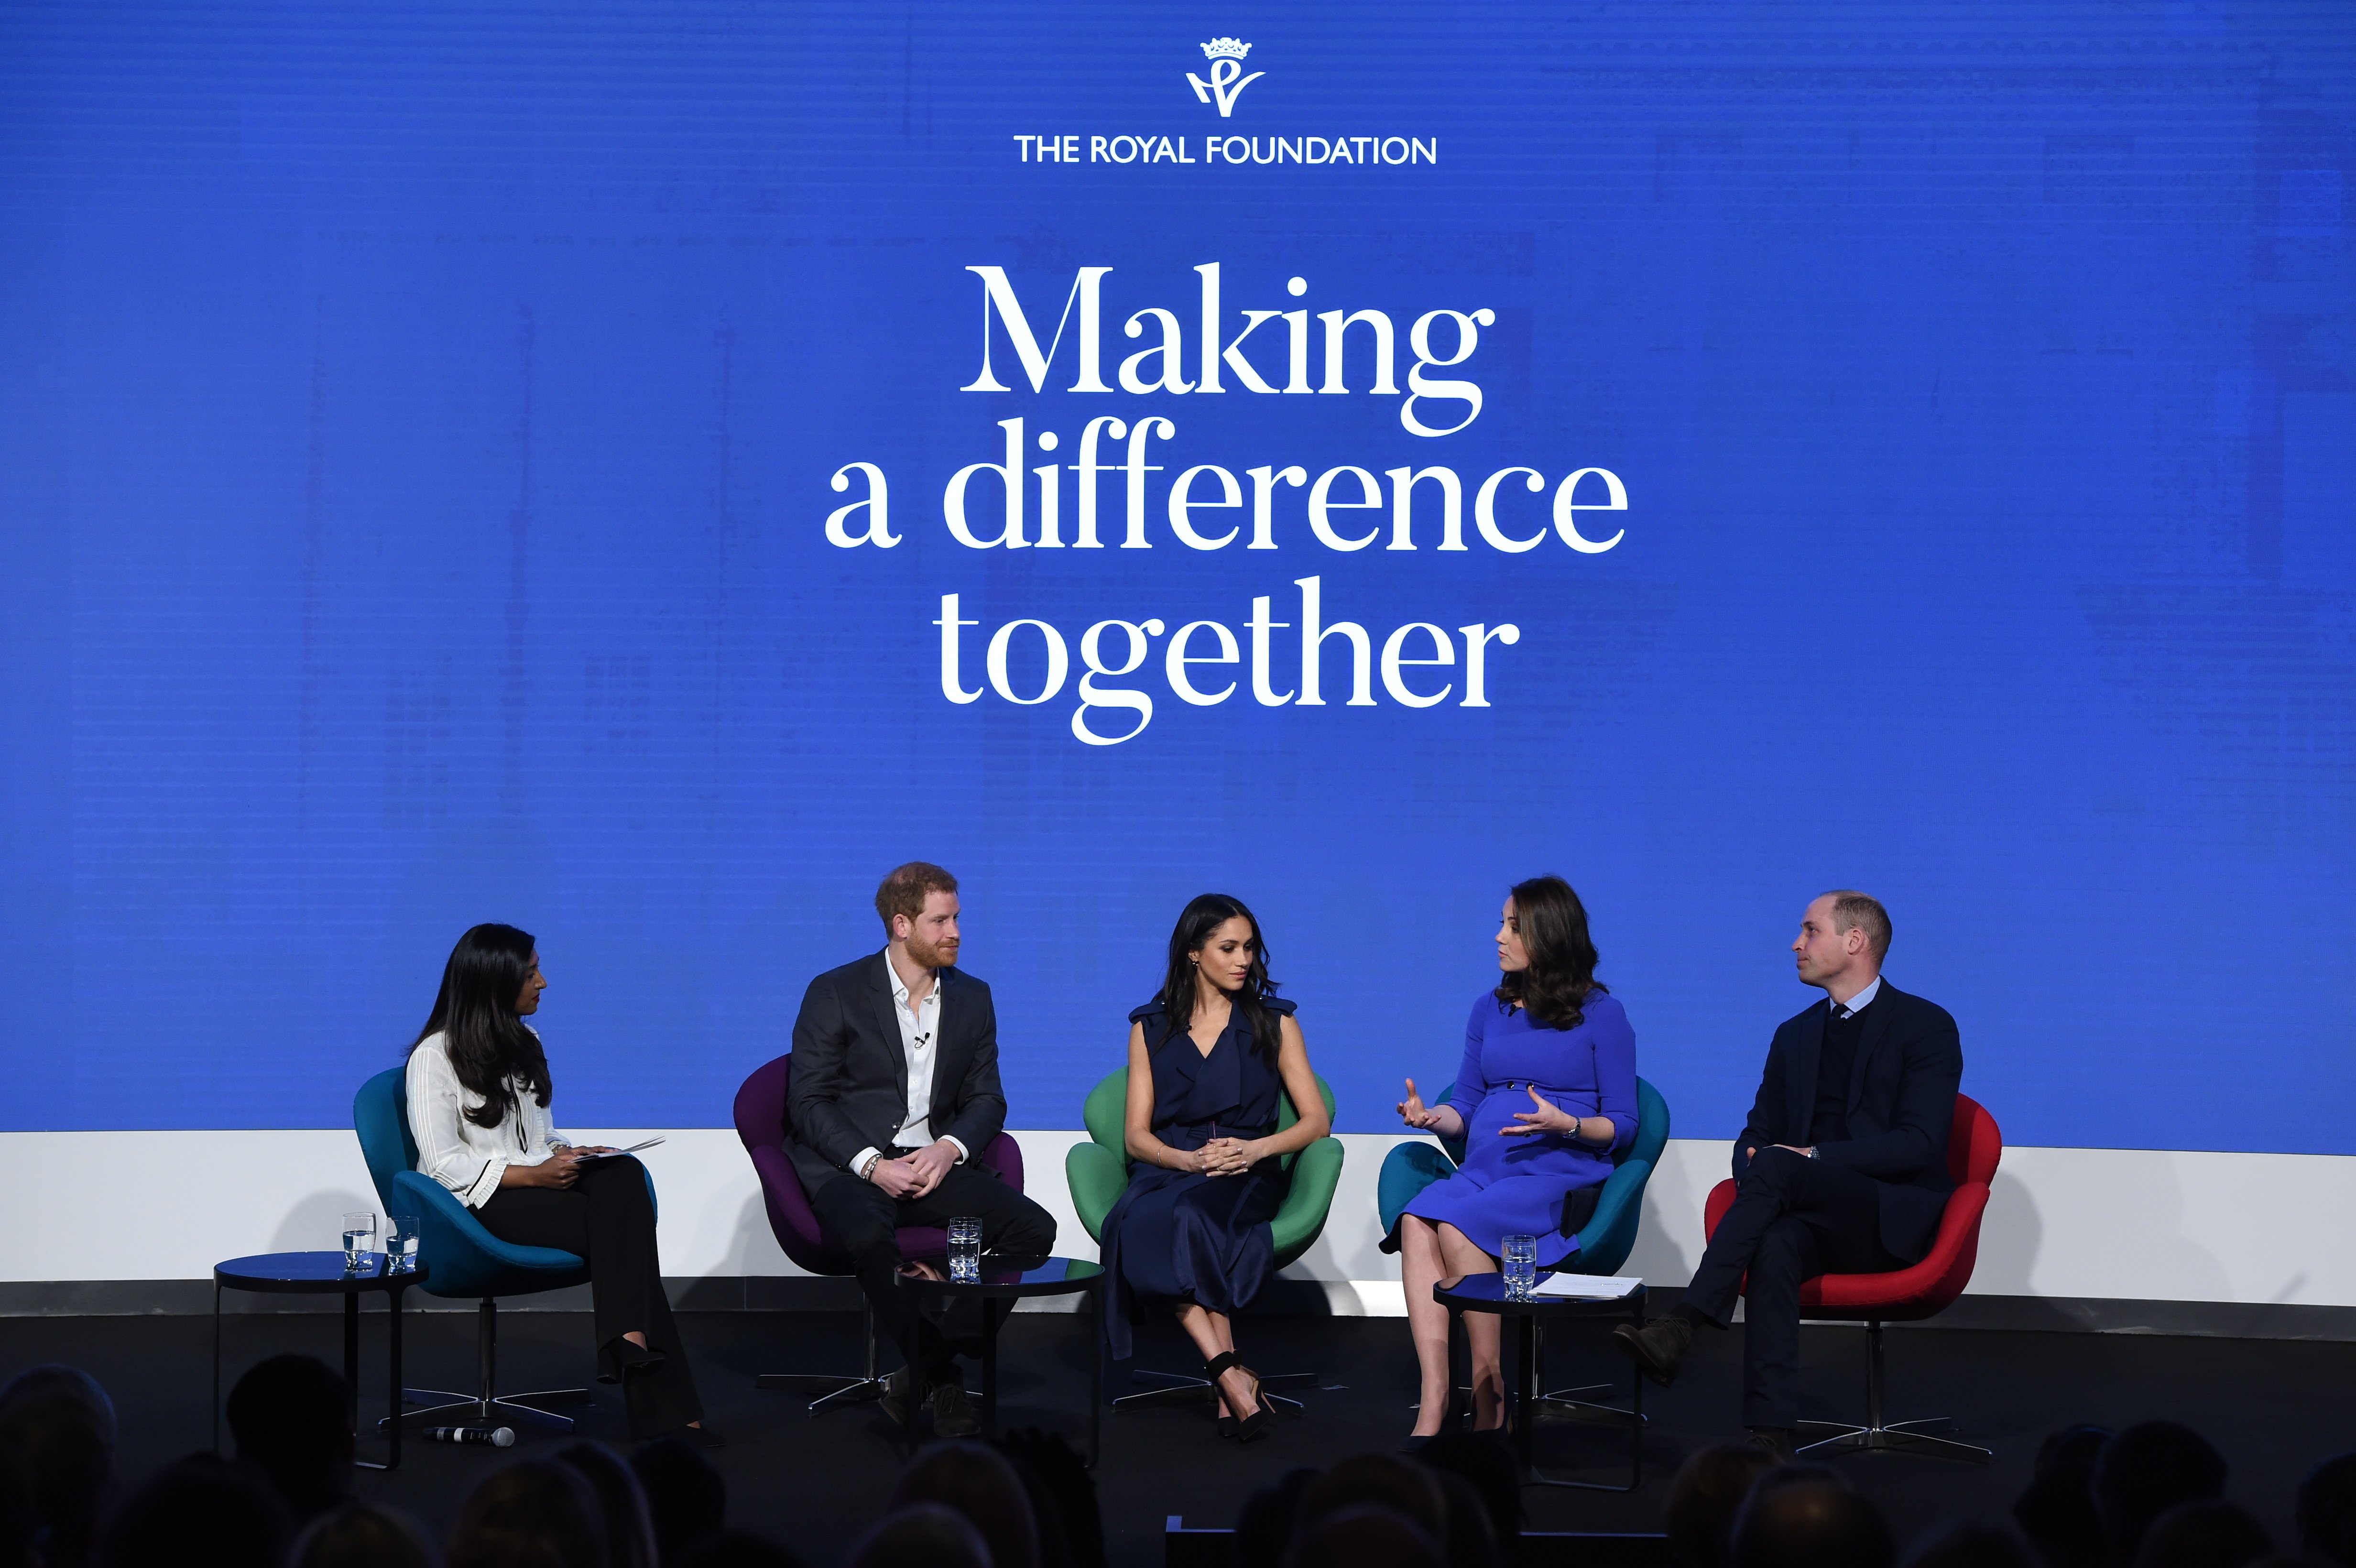 Prince Harry, Meghan Markle, Kate Middleton, and Prince William attend the first annual Royal Foundation Forum